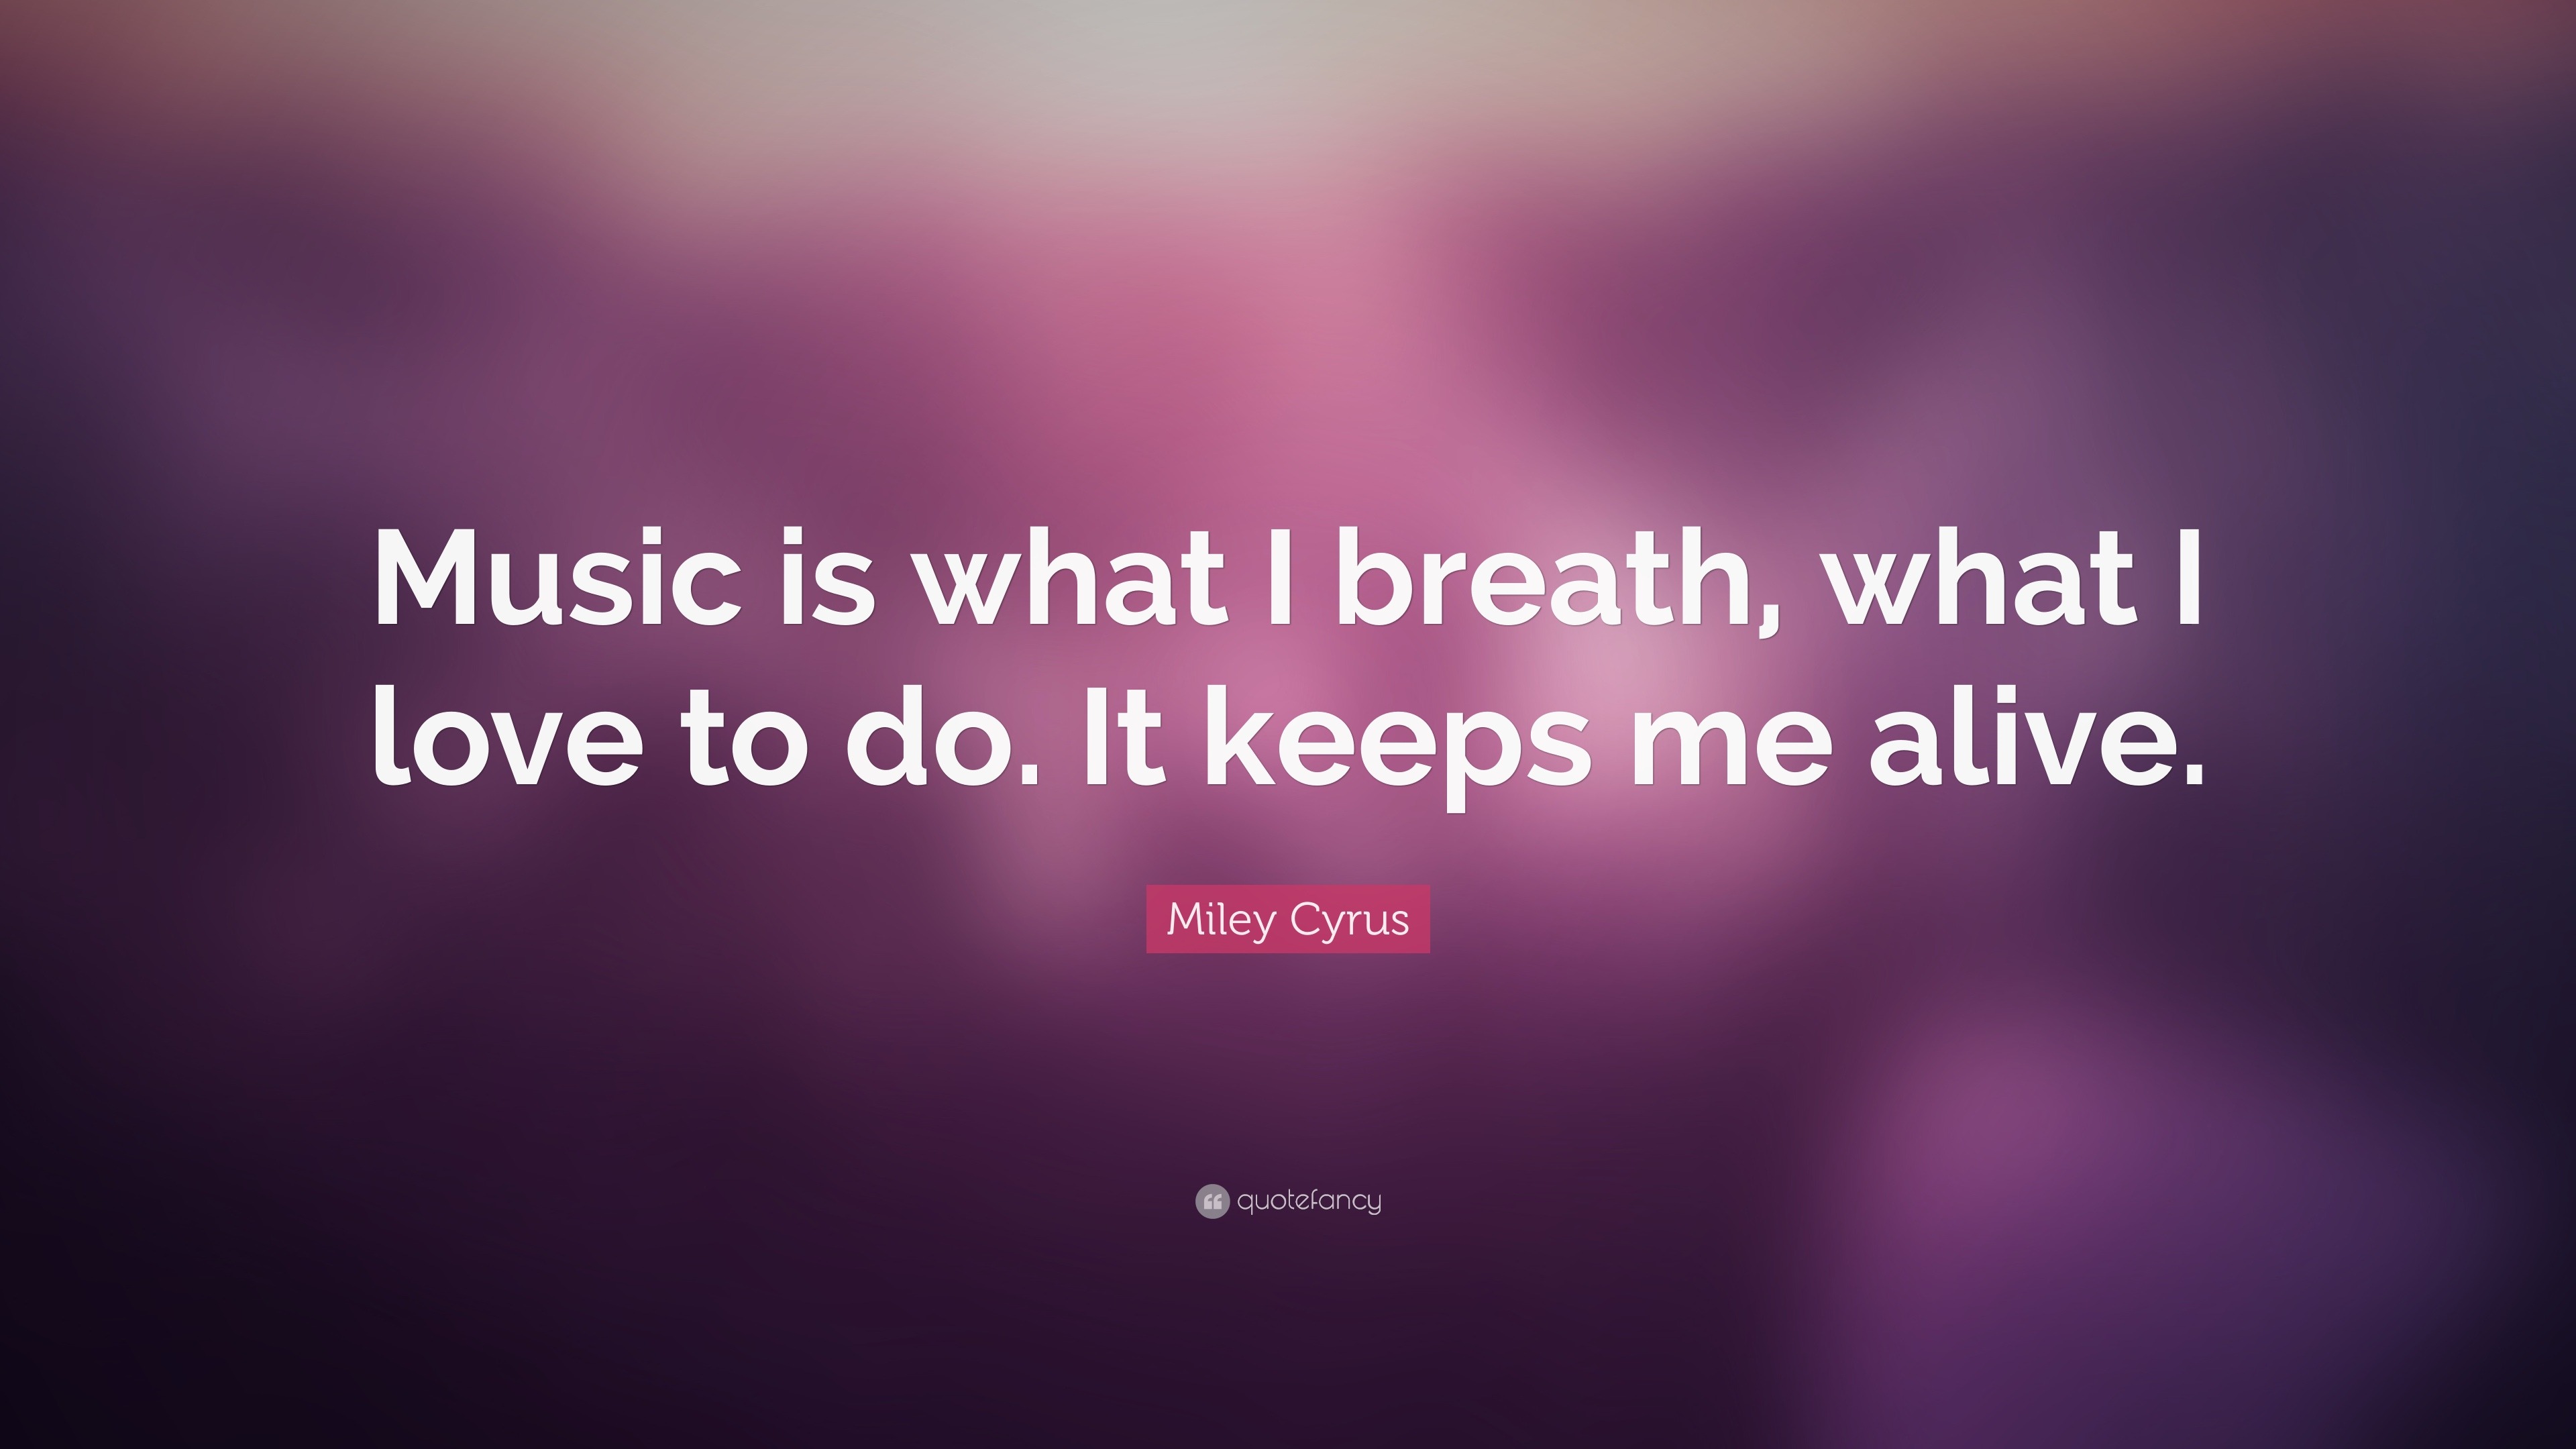 Miley Cyrus Quote: “Music is what I breath, what I love to do. It keeps ...